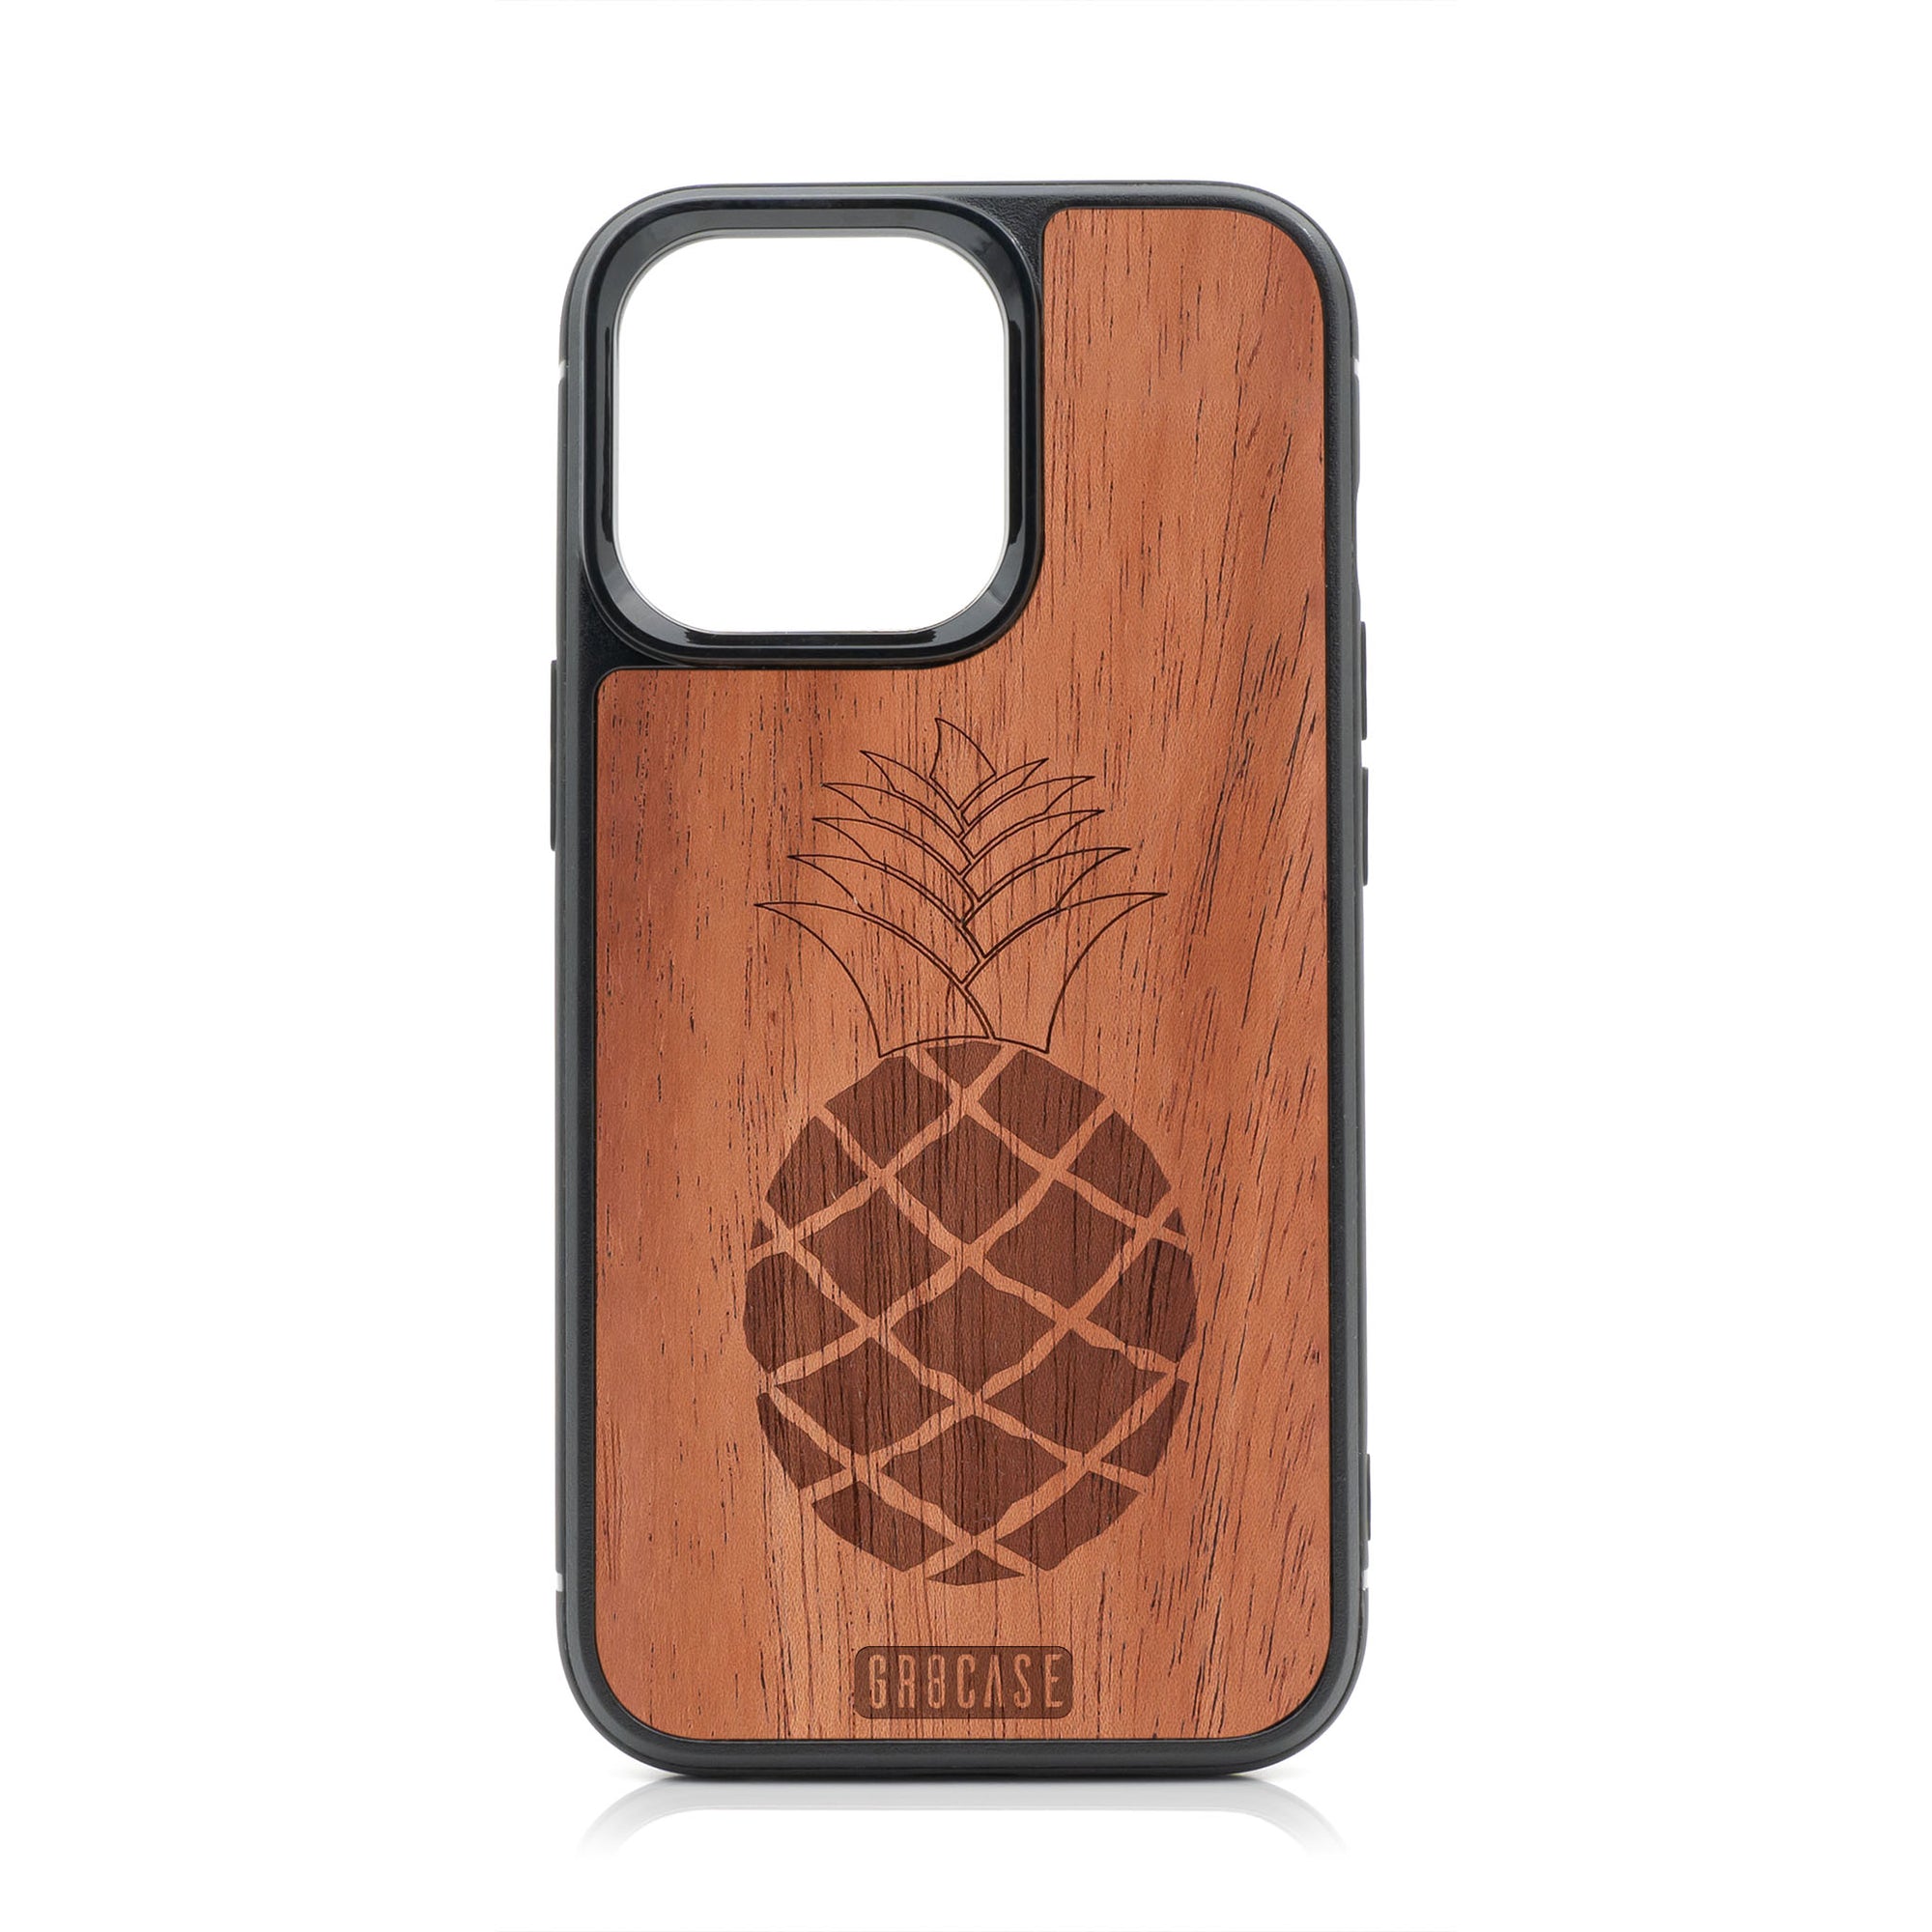 Pineapple Design Wood Case For iPhone 13 Pro